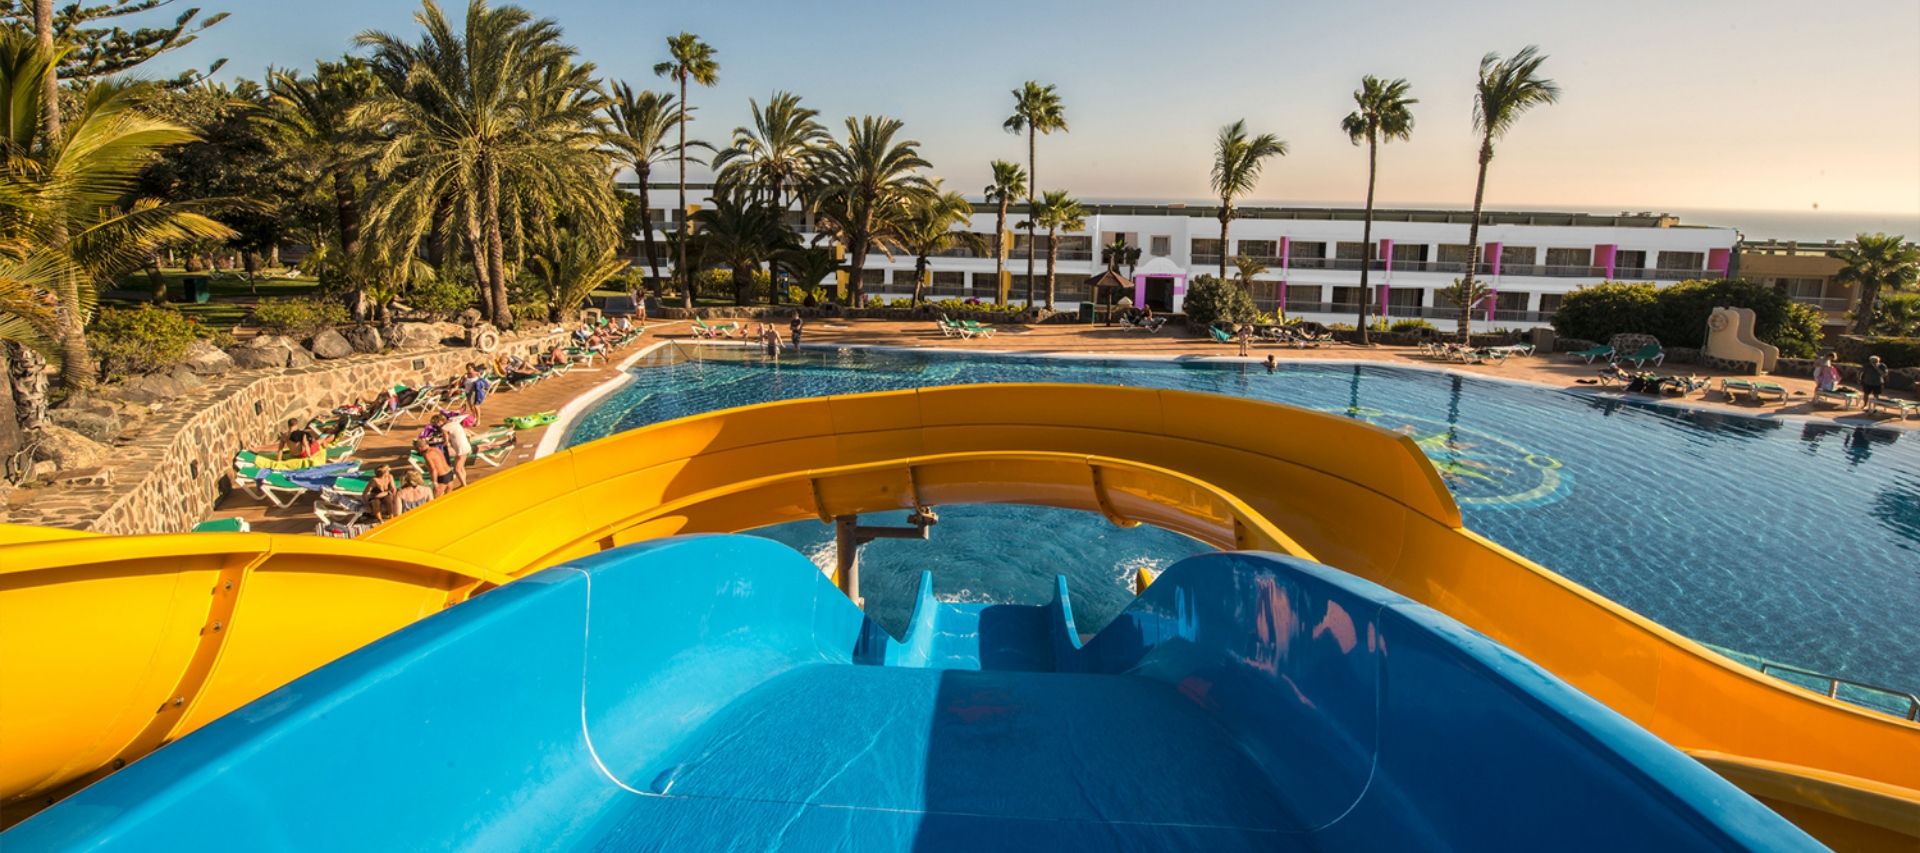 Top 10 Hotels with Waterslides for your Family Sun Holiday